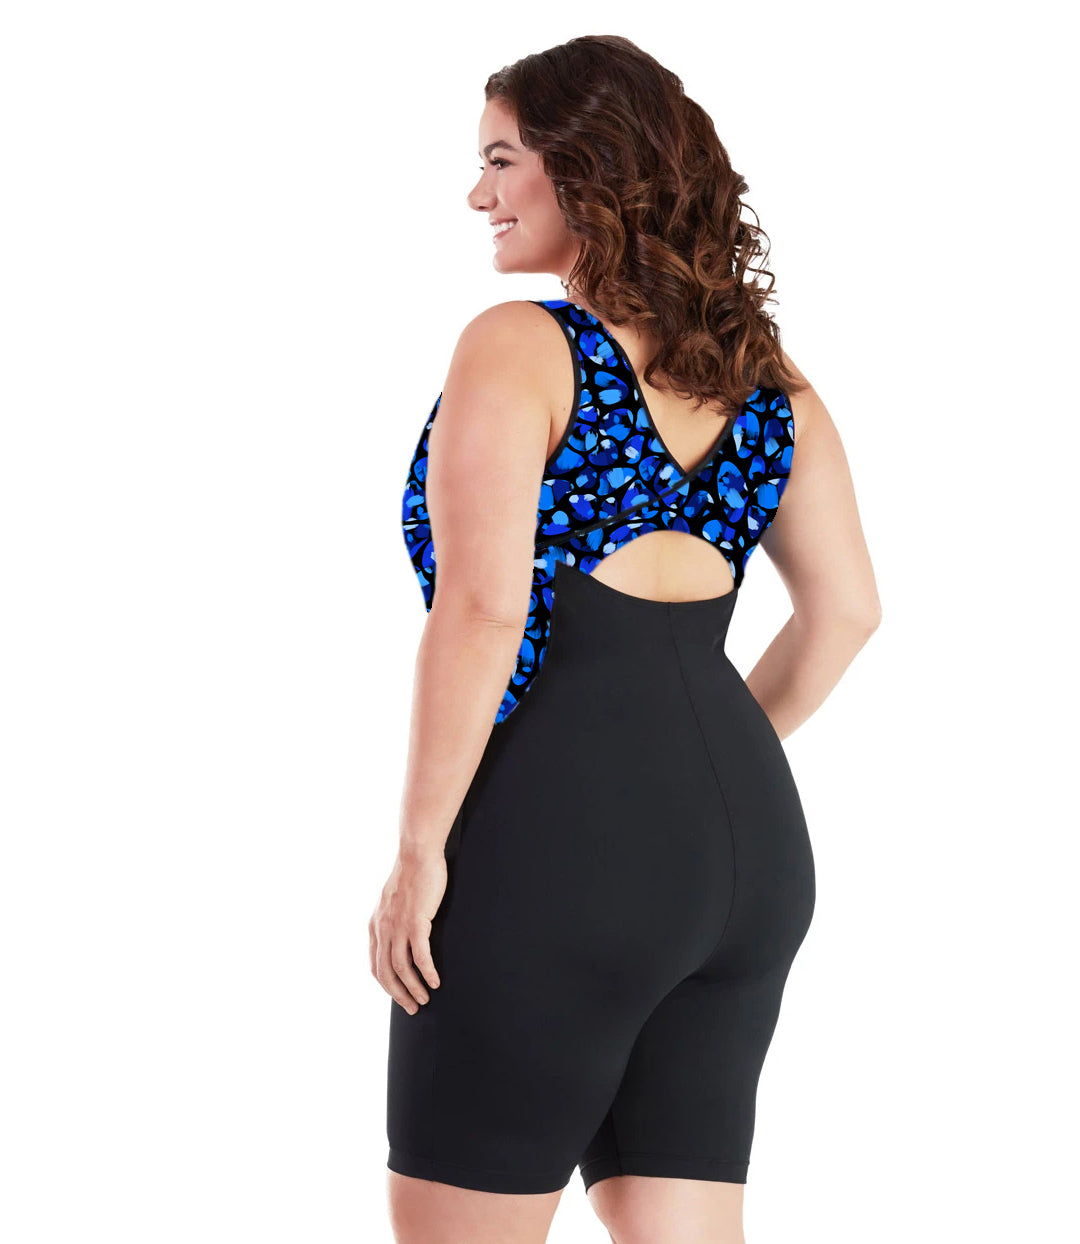 Plus size woman, back view, wearing JunoActive plus size AquaSport Crossback Aquatard Ocean Blues Print Black. The overlapping crossback and side blocking detail of the tanksuit is a multi colored blue bubble print. The main body of the suit is solid black, keyhole opening at the mid-back. The leg hits a few inches above the knee.